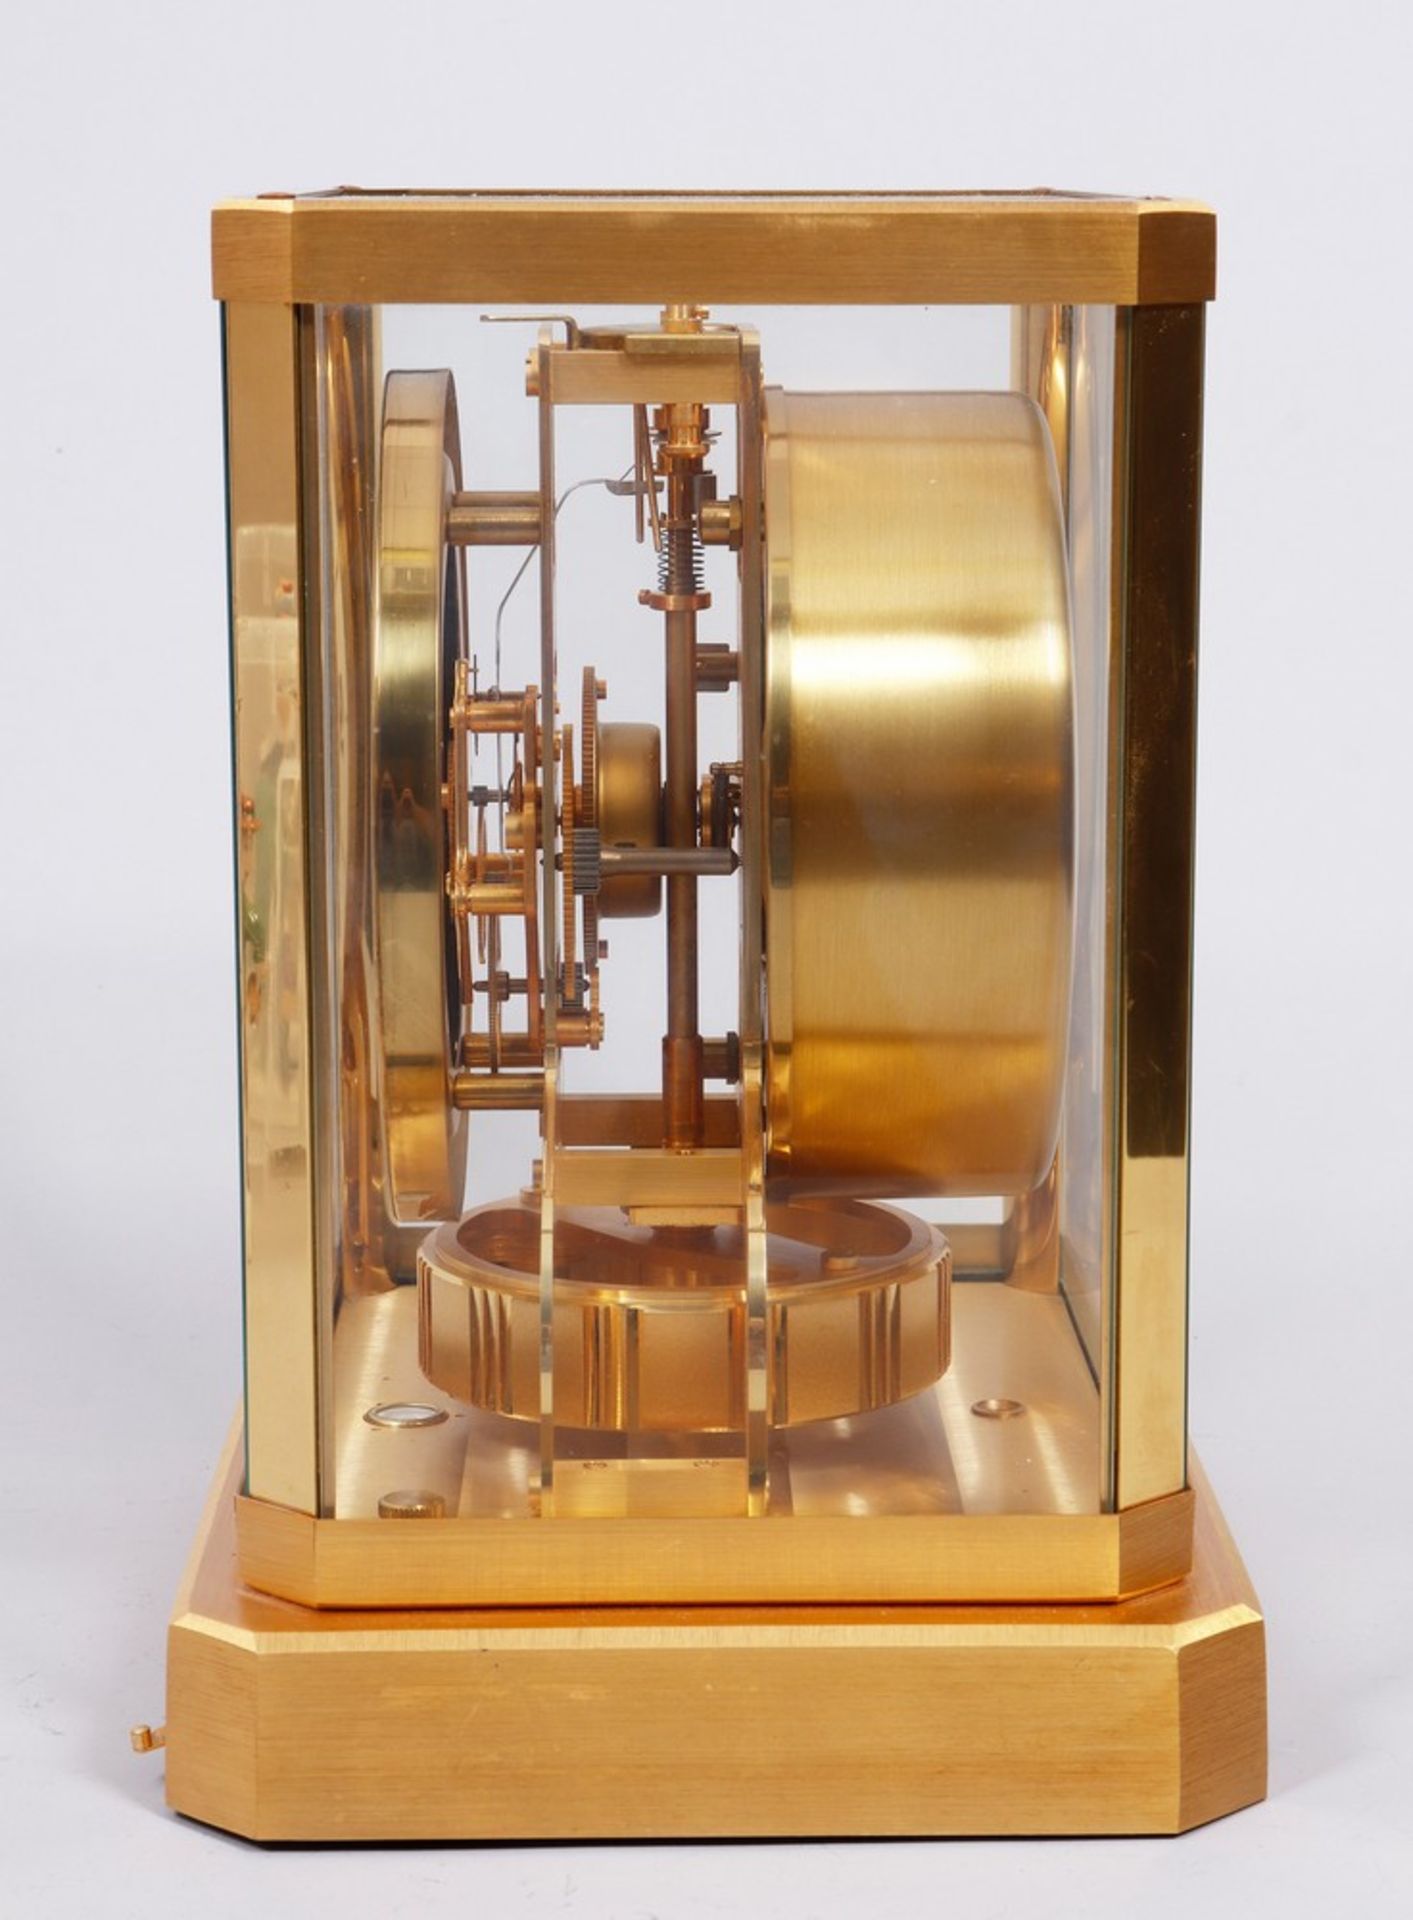 Table clock, Jaeger LeCoultre, Switzerland, 1970s - Image 3 of 7